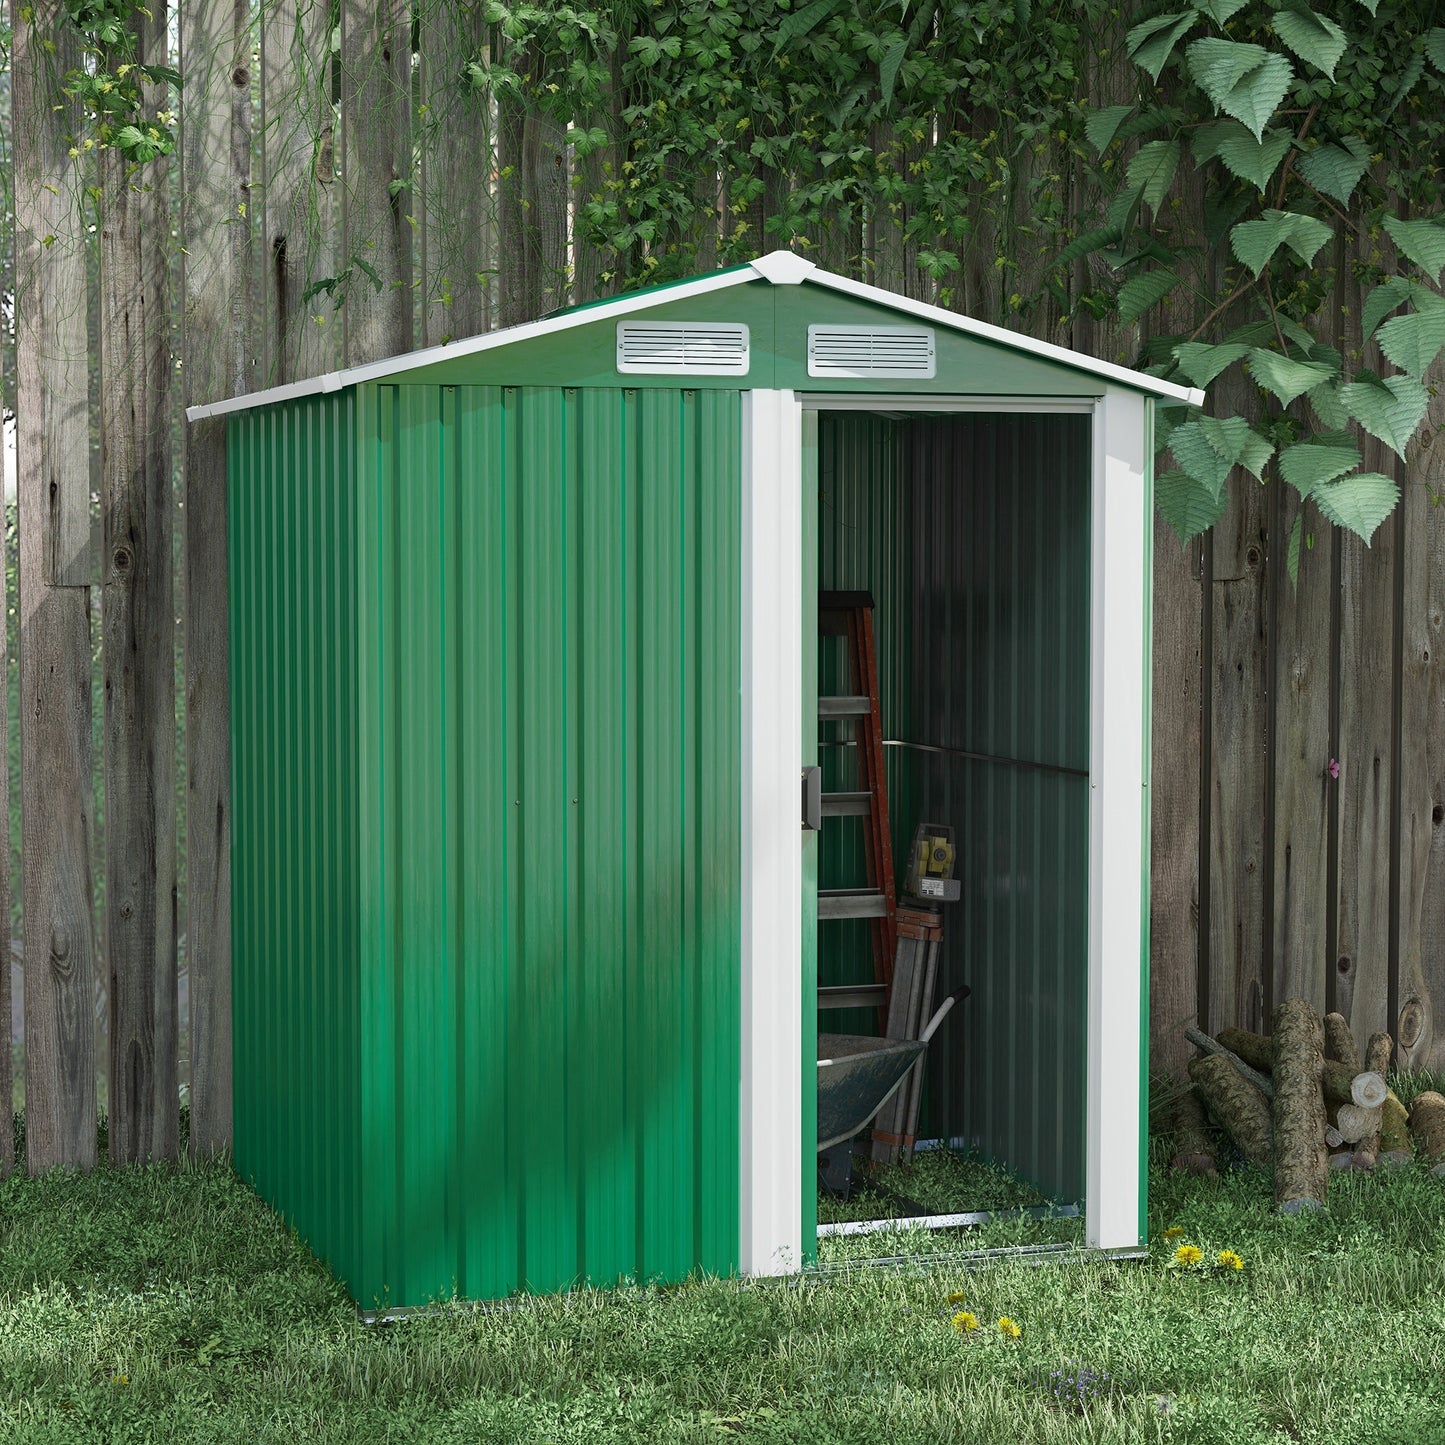 Outsunny Garden Metal Tool Storage Shed with Sliding Door, Sloped Roof and Floor Foundation, 152 x 132 x 188cm, Green